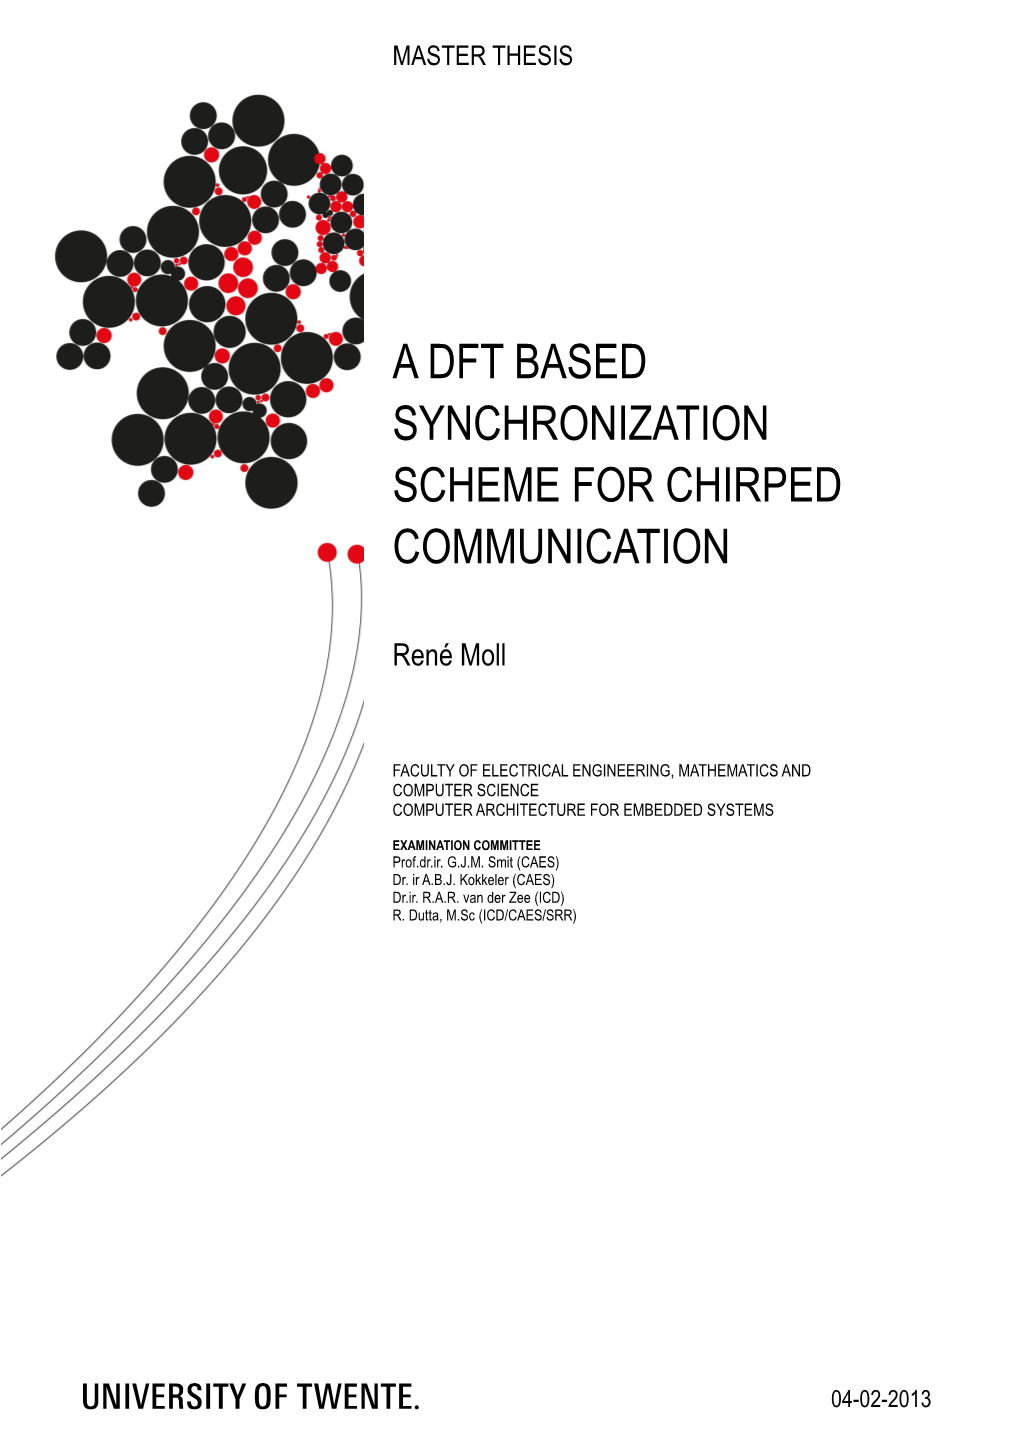 A Dft Based Synchronization Scheme for Chirped Communication